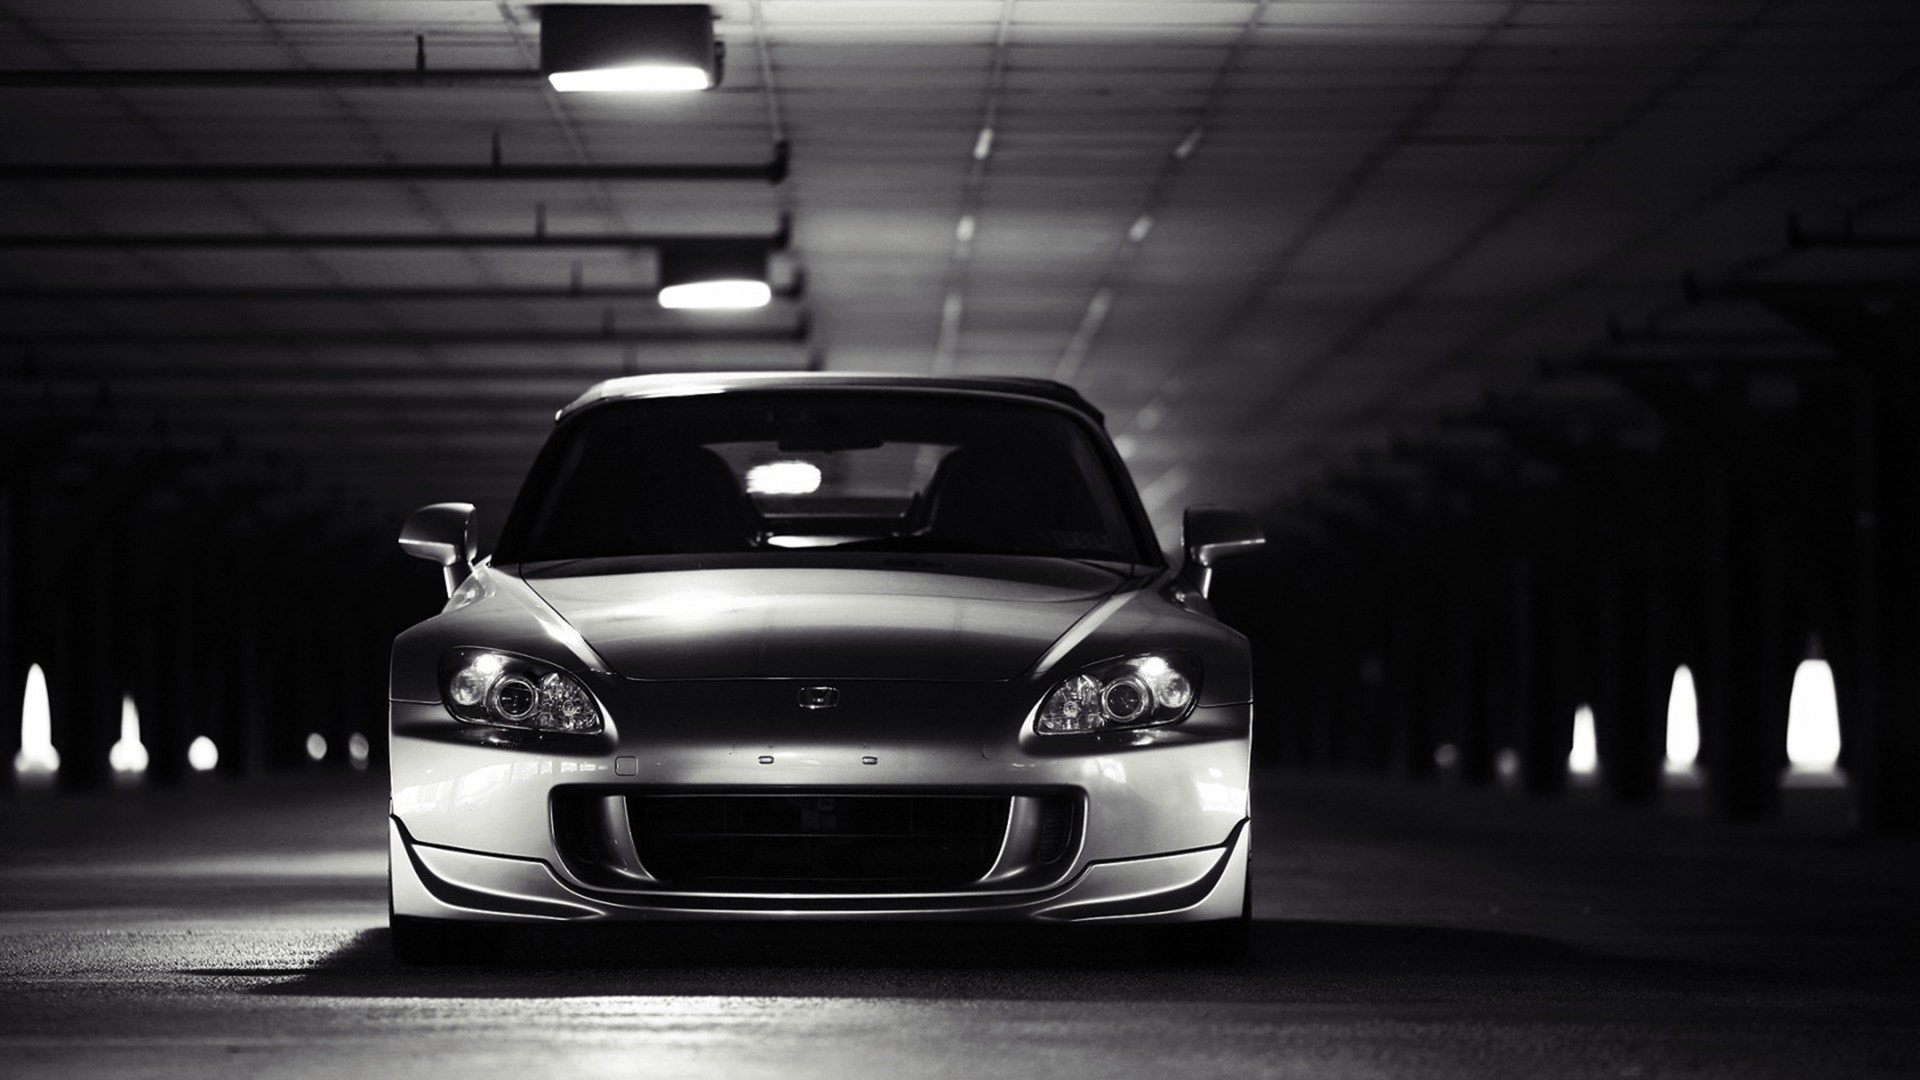 1920x1080 35 Honda S2000 HD Wallpapers | Backgrounds - Wallpaper Abyss ...